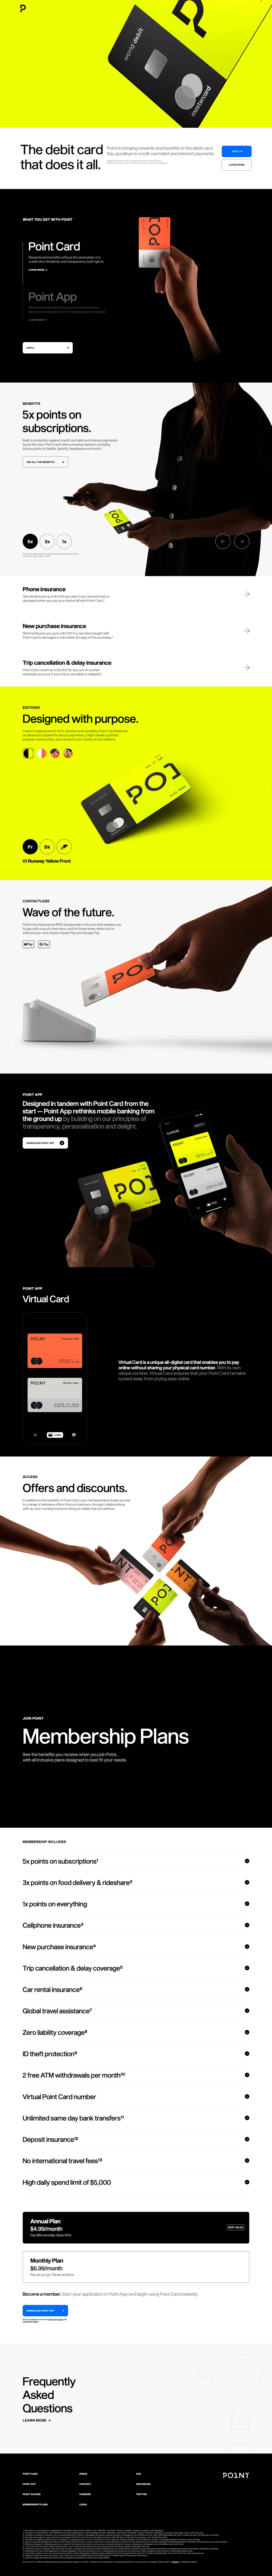 Point Landing Page Example: Point is bringing rewards and benefits to the debit card. Say goodbye to credit card debt and interest payments.